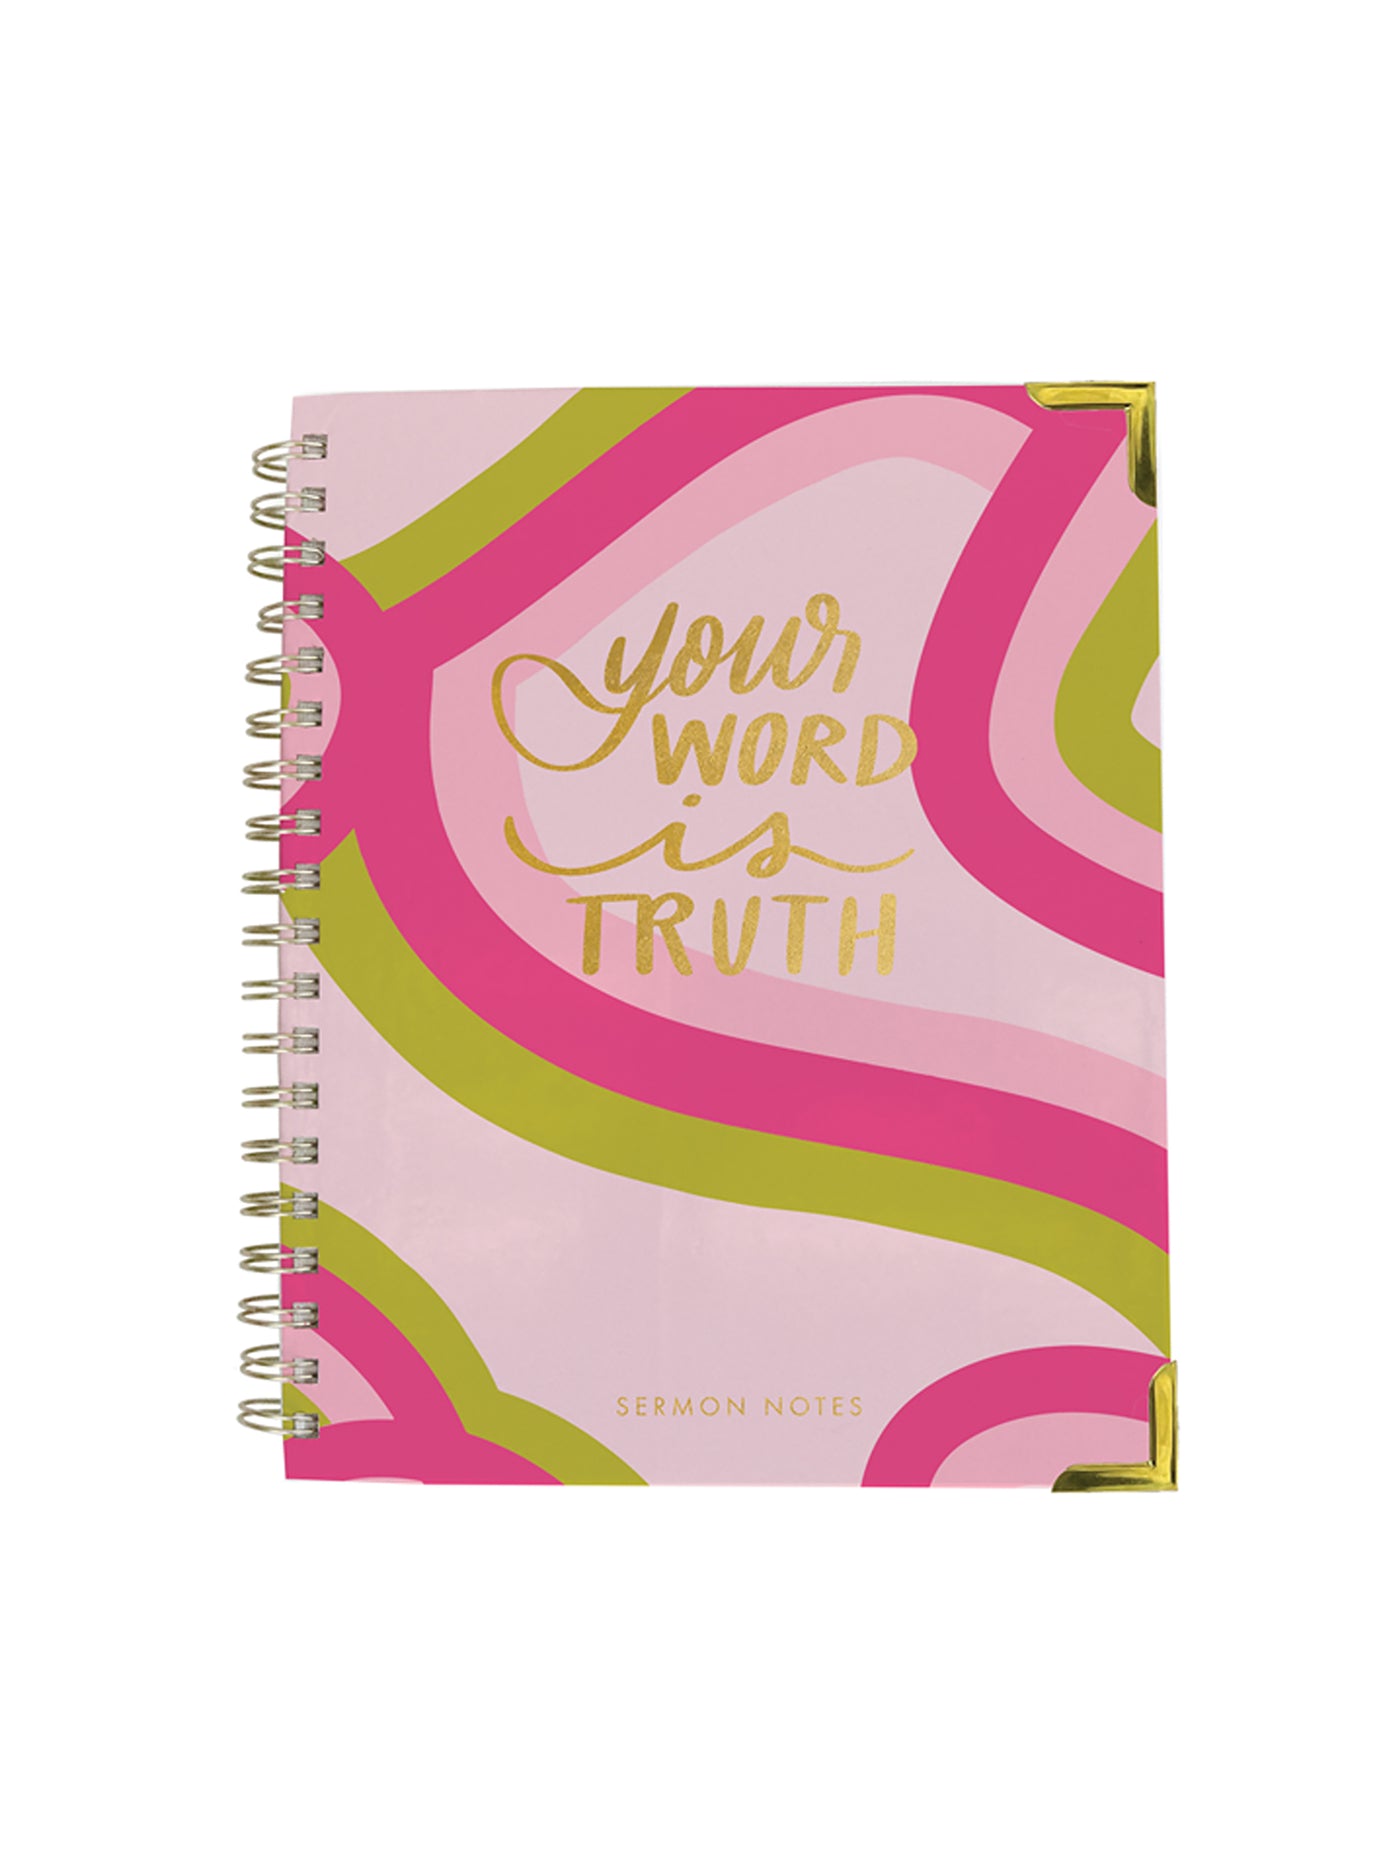 You Word is Truth | Sermon Notes Journal - Mary Square, LLC